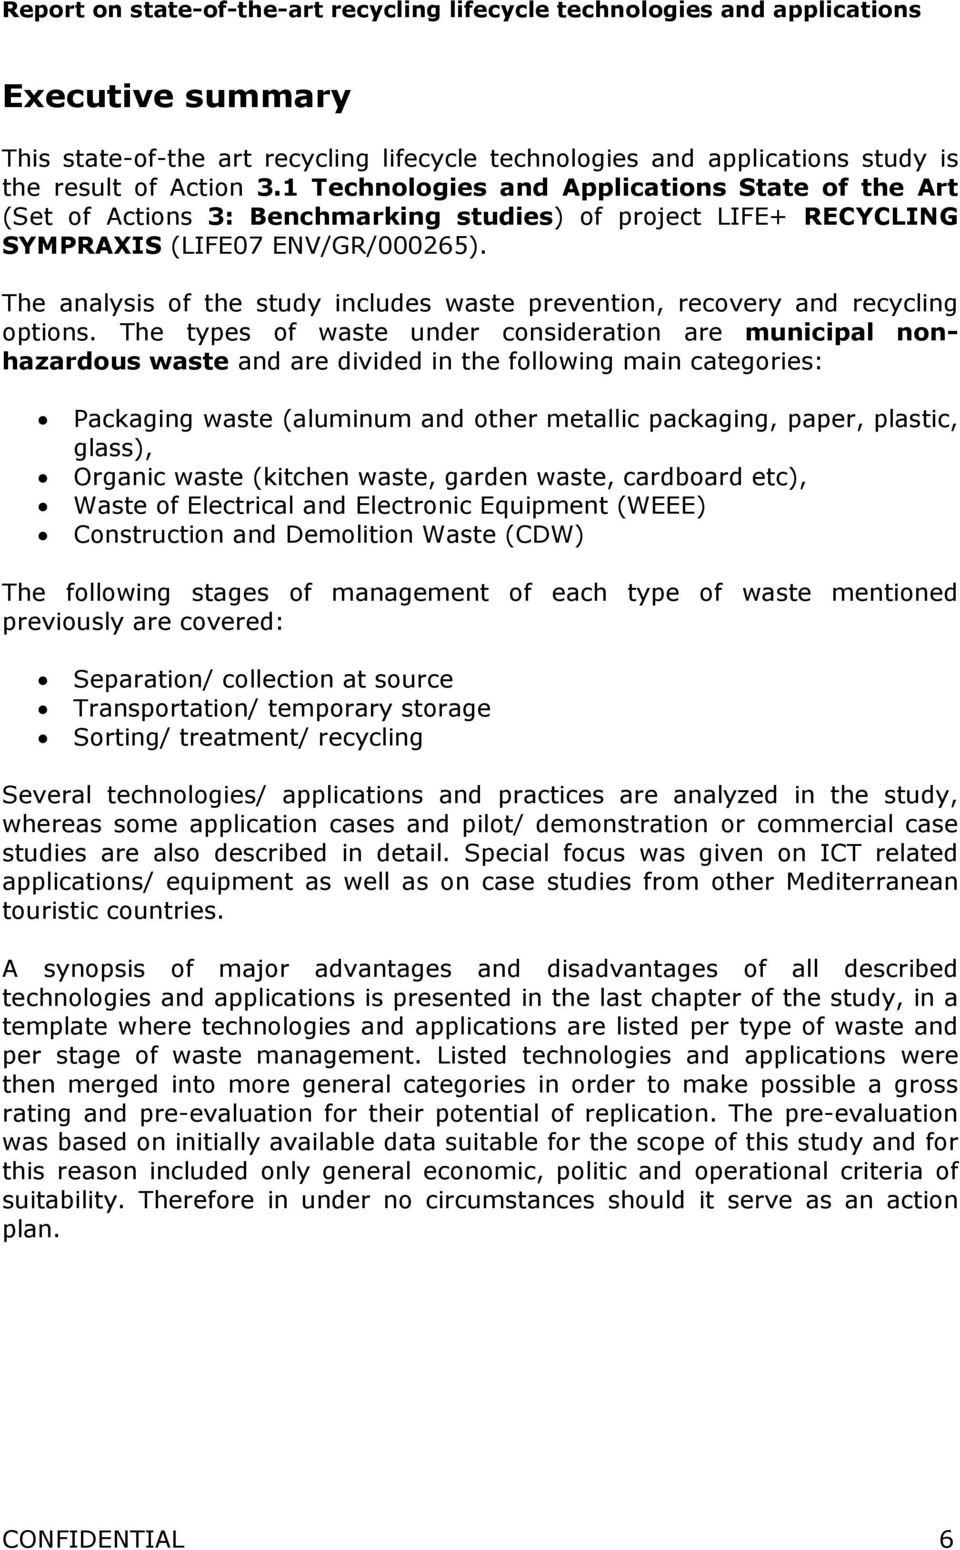 The analysis of the study includes waste prevention, recovery and recycling options.